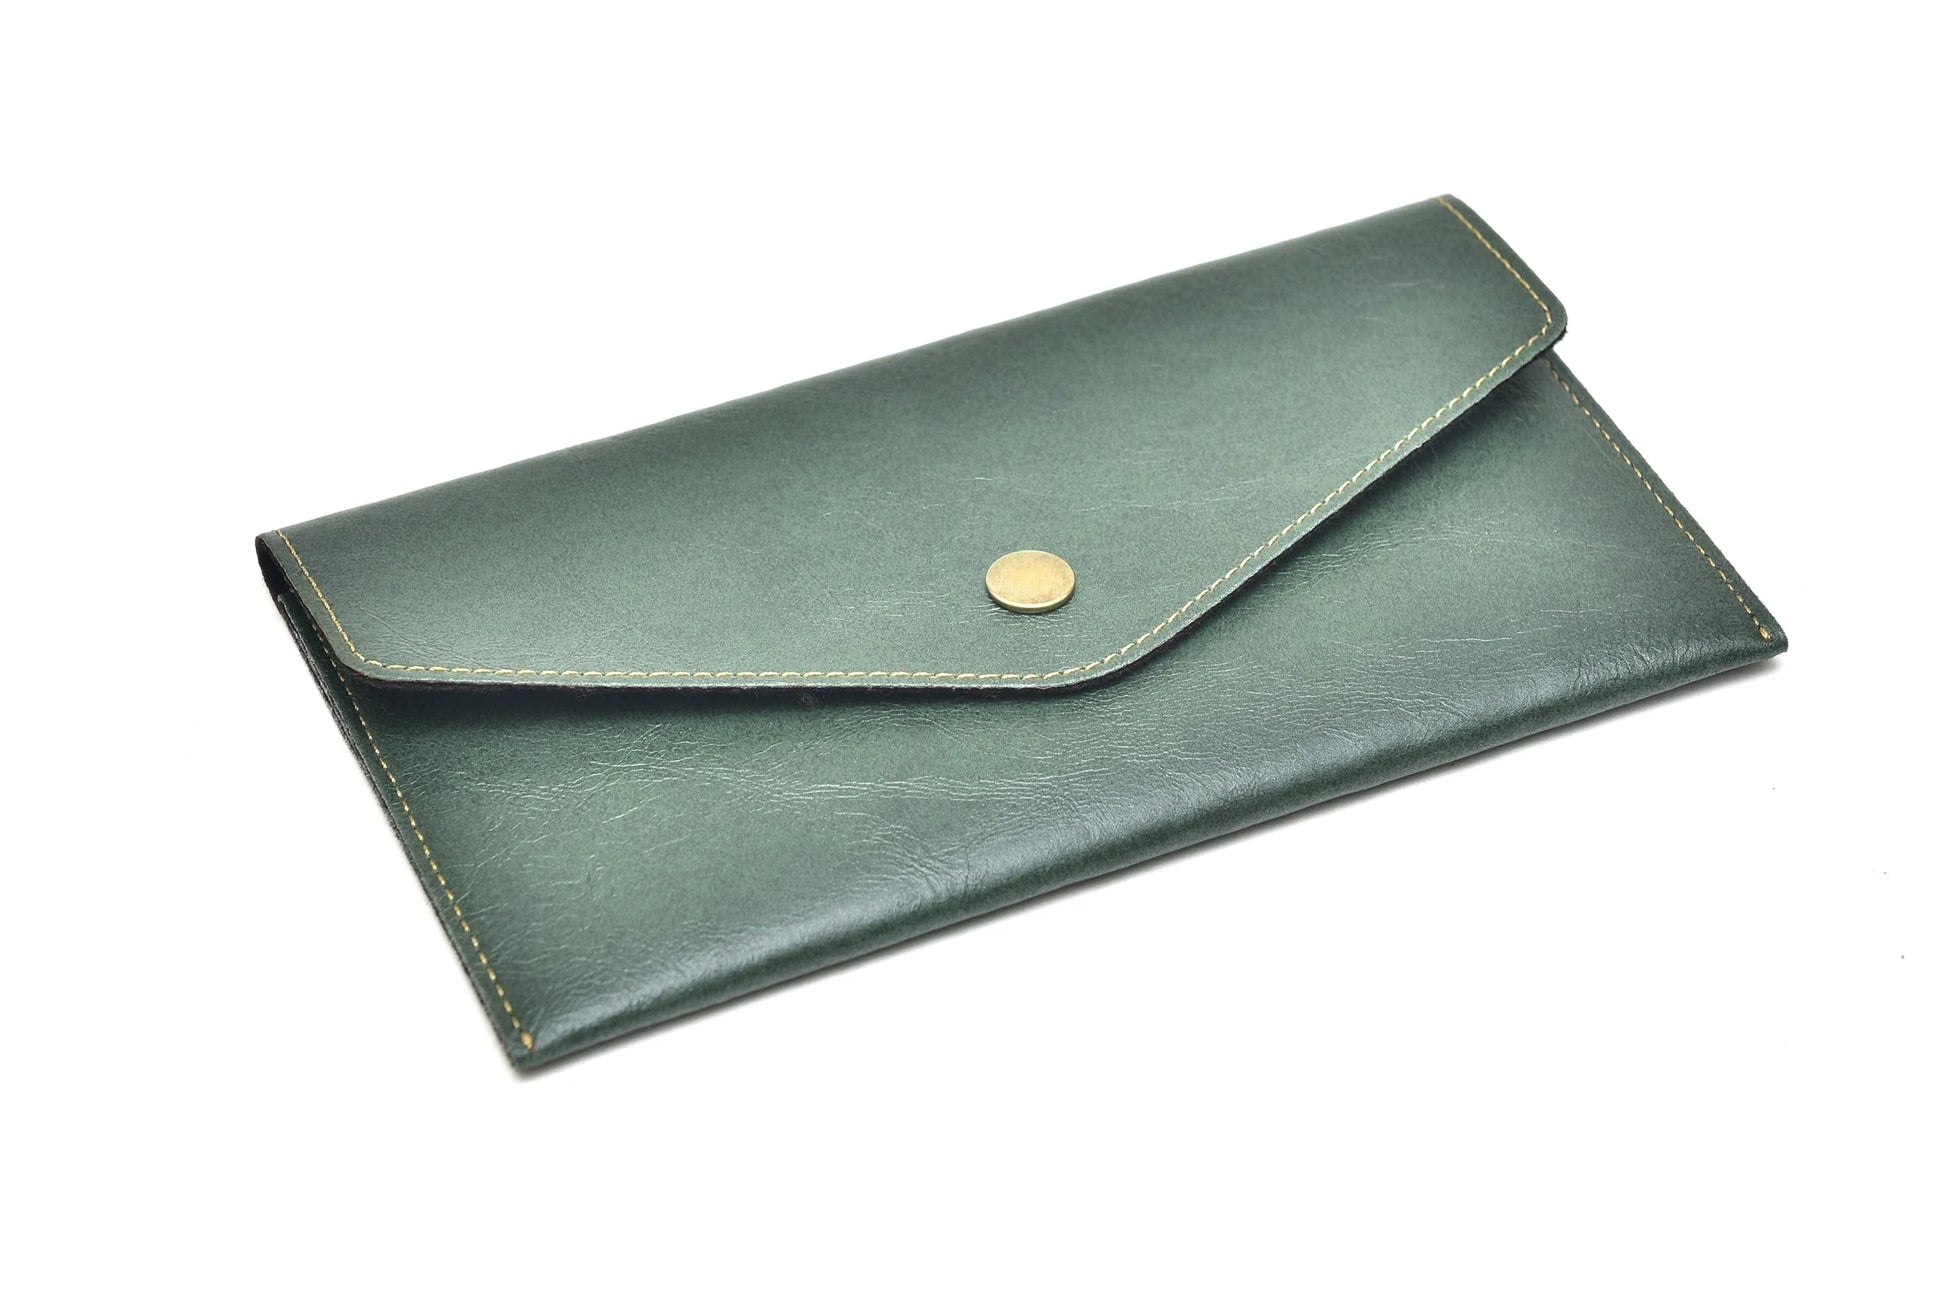 Carry your essentials in style with this chic and compact personalized leather clutch. With a variety of customization options, make it your own and stand out from the crowd.